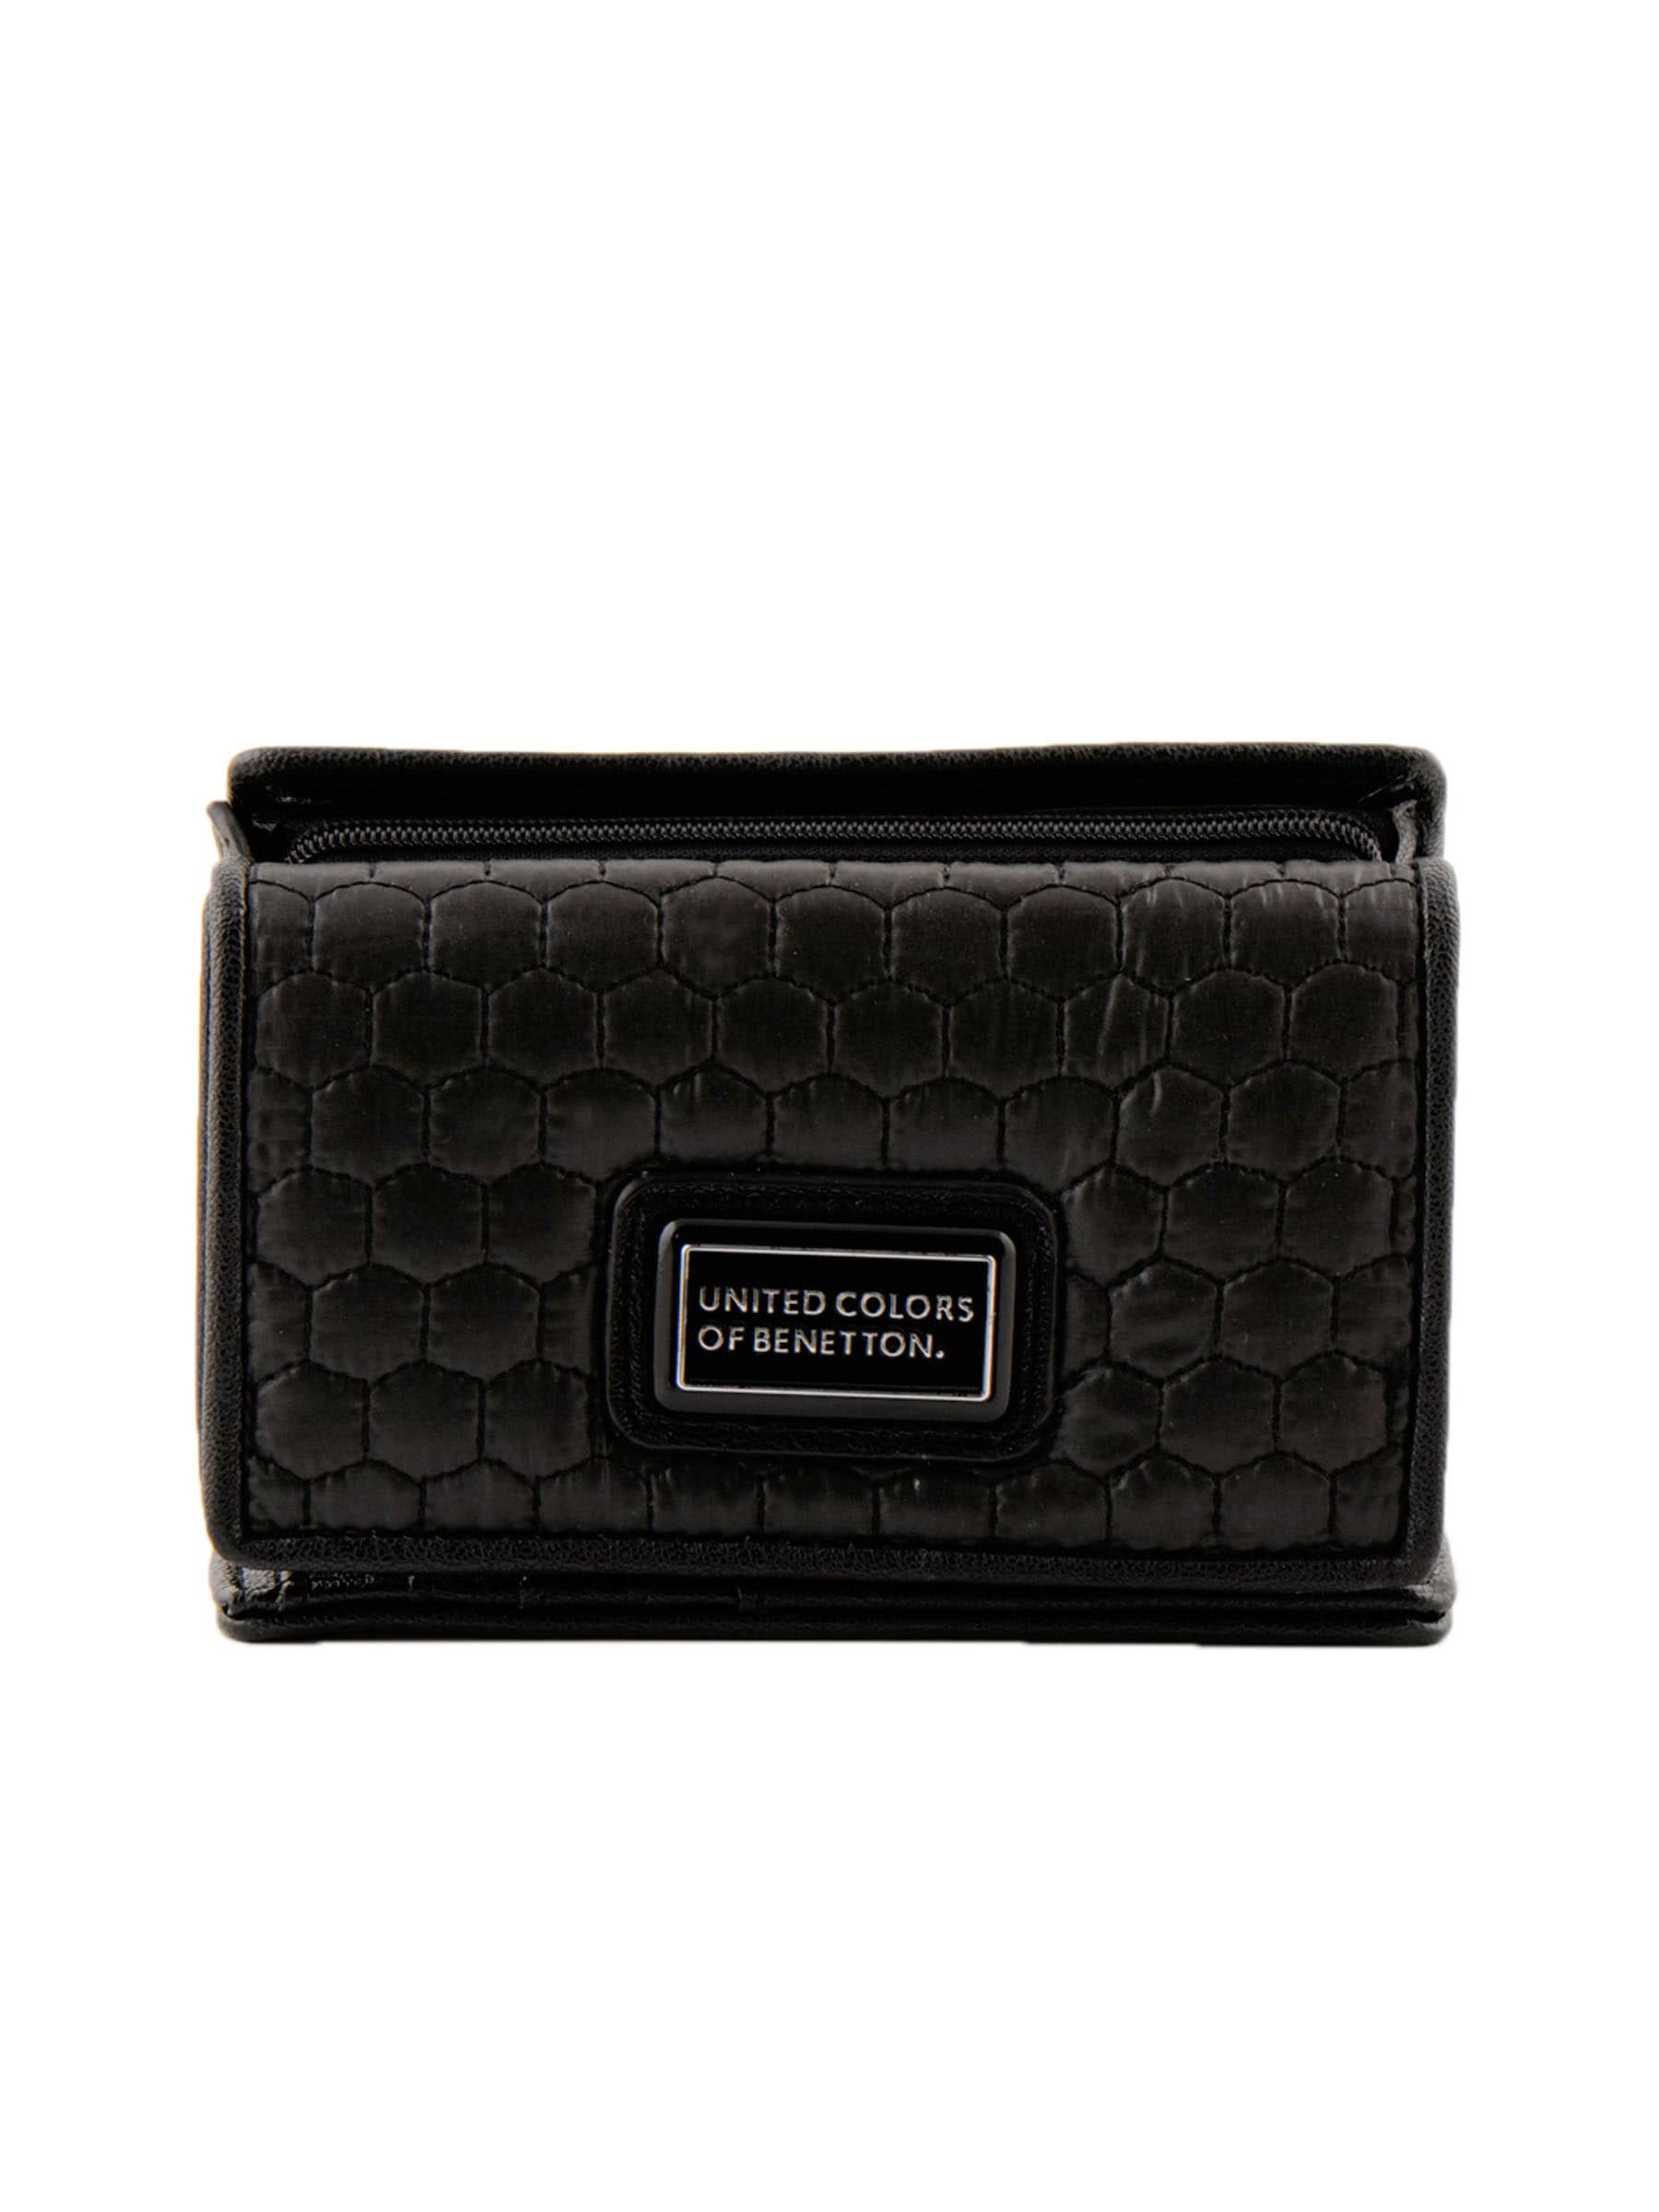 United Colors of Benetton Women Solid Black Wallets